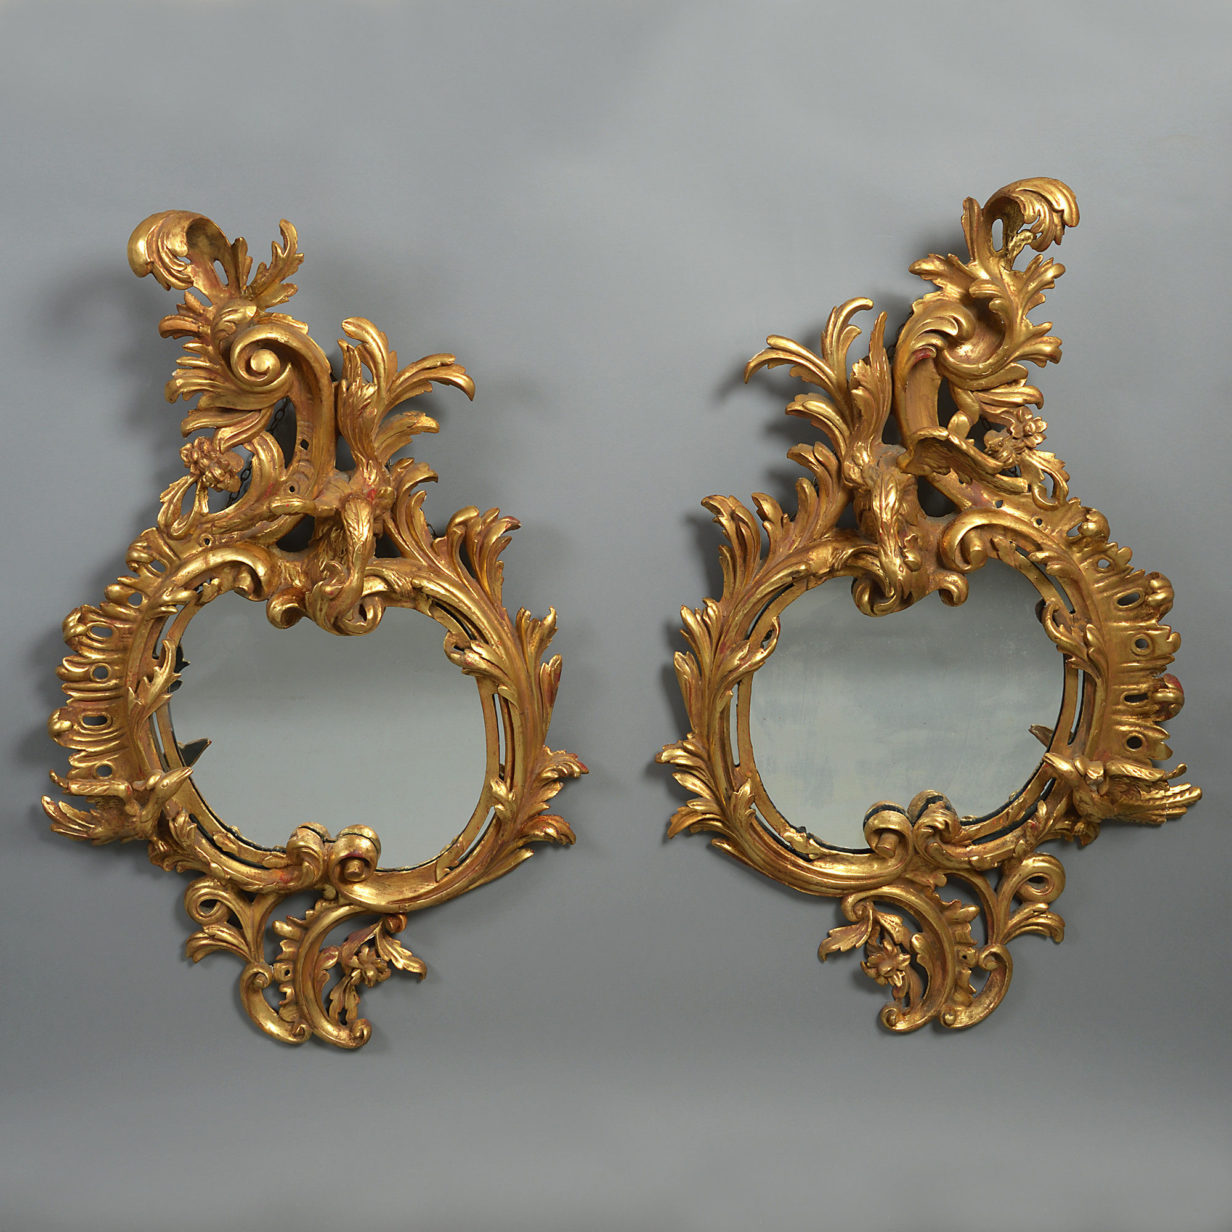 19th century pair of giltwood rococo mirrors